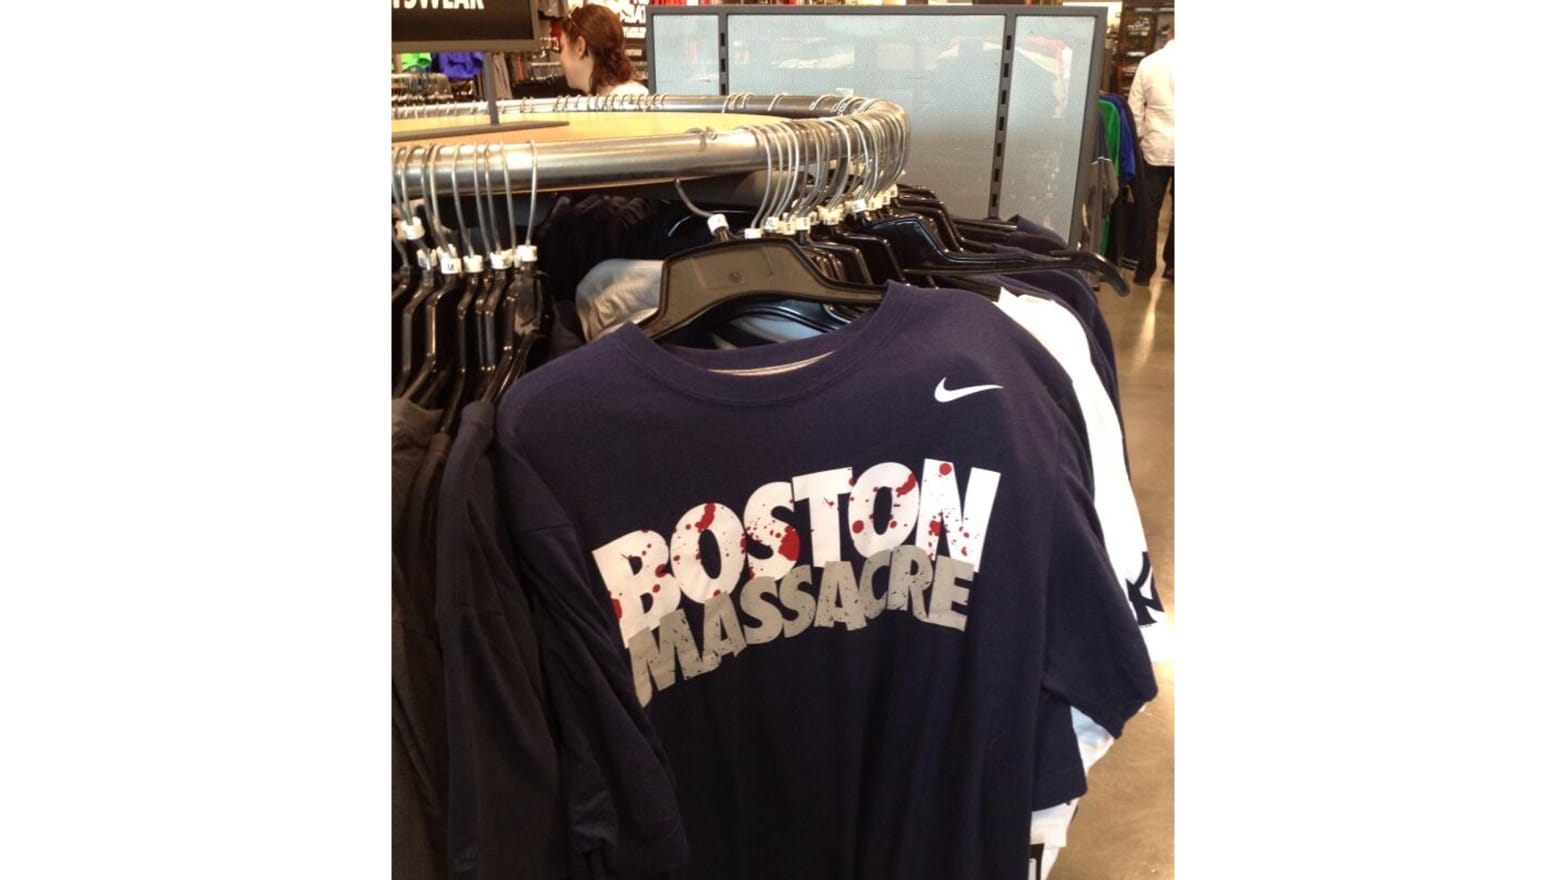 Nike Boston Massacre T-shirt to be removed from stores